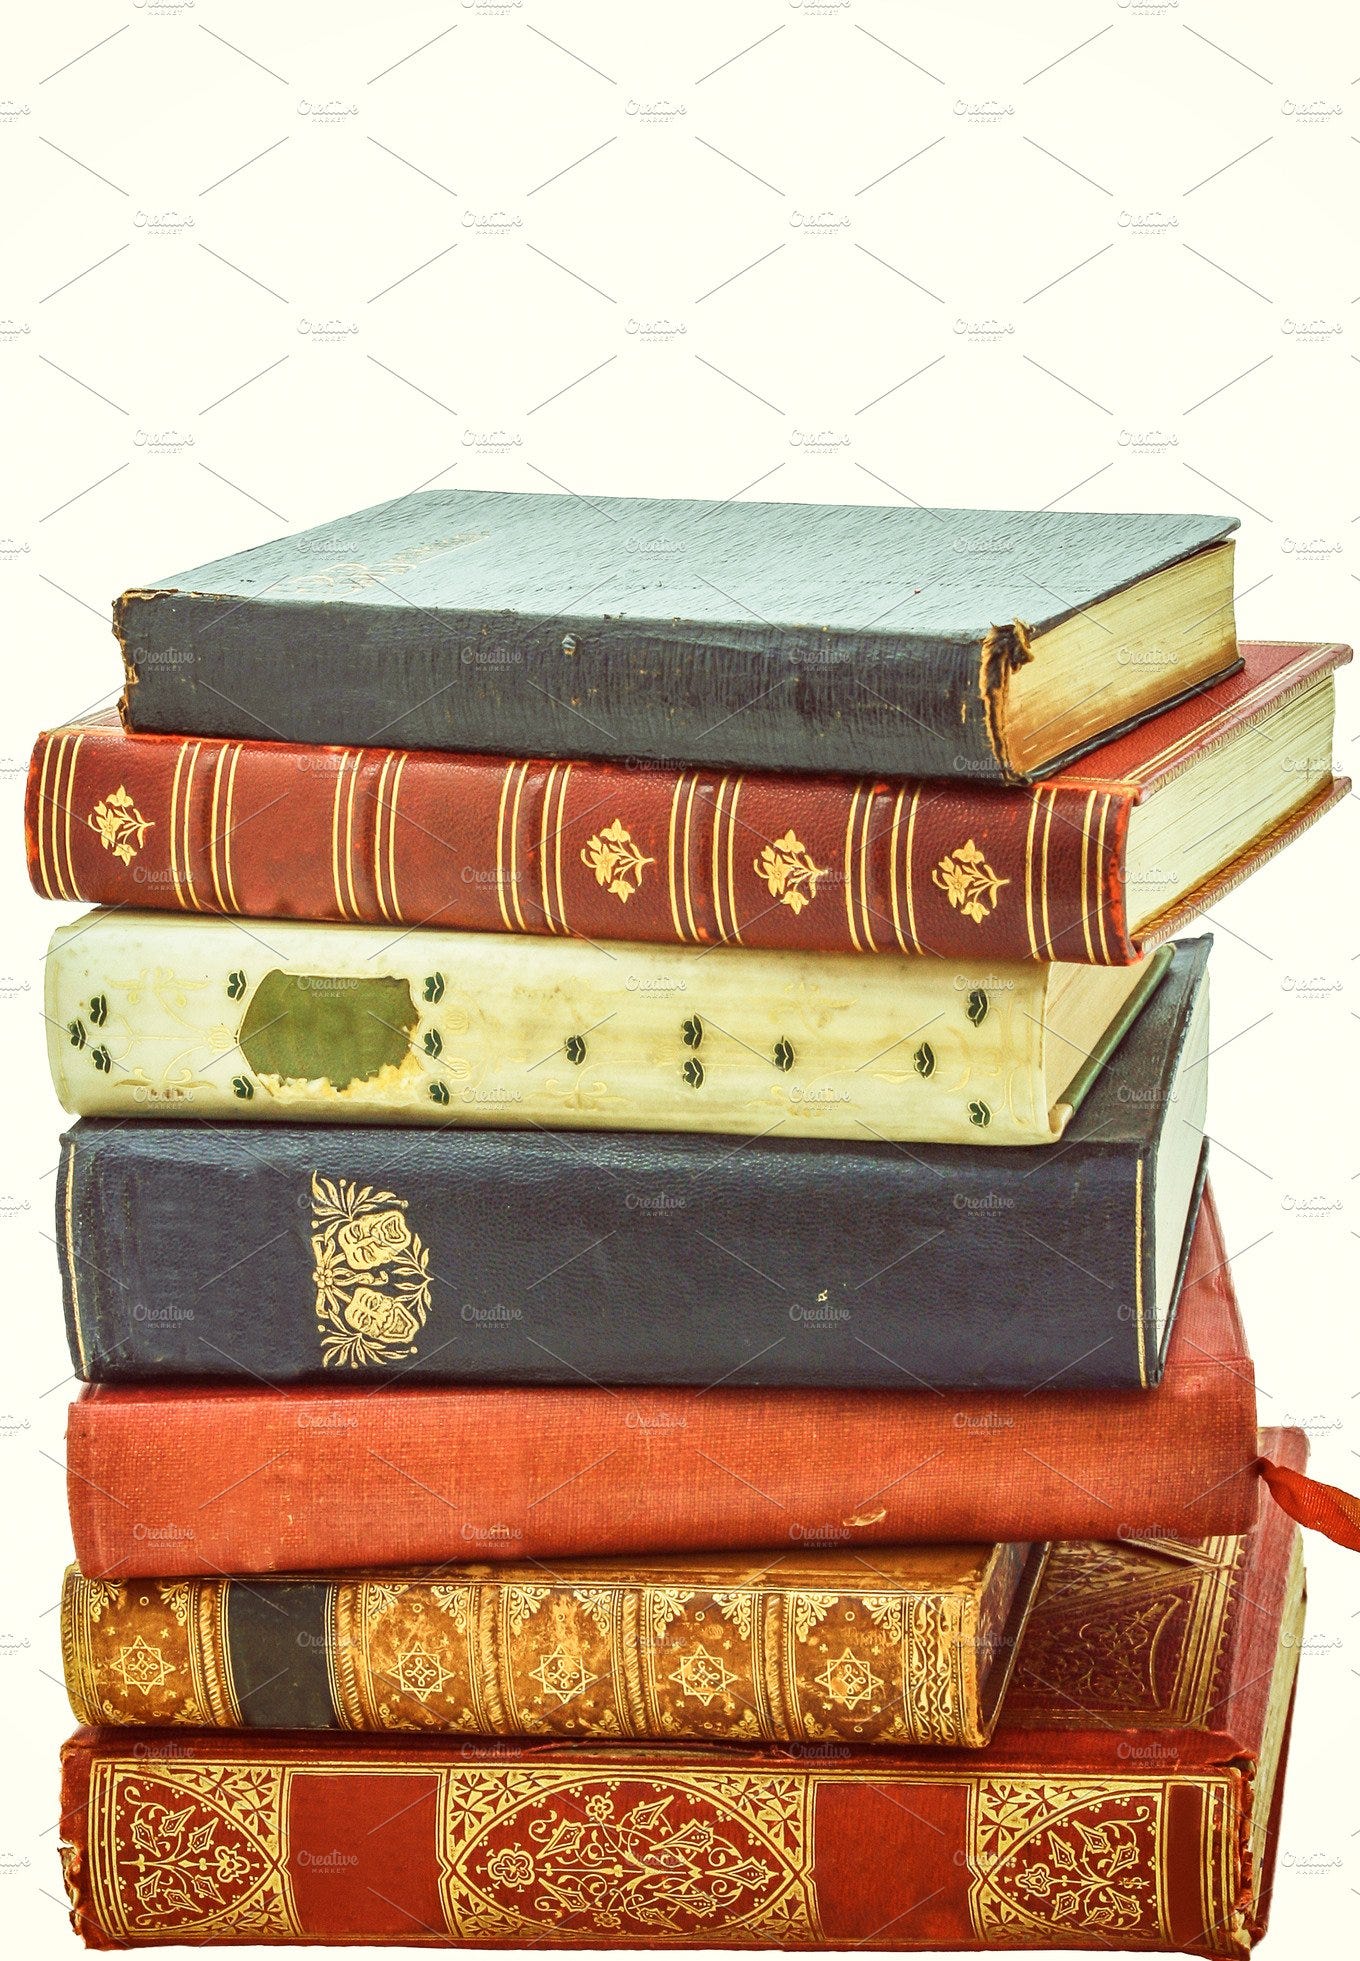 A stack of antique books | High-Quality Education Stock Photos ...